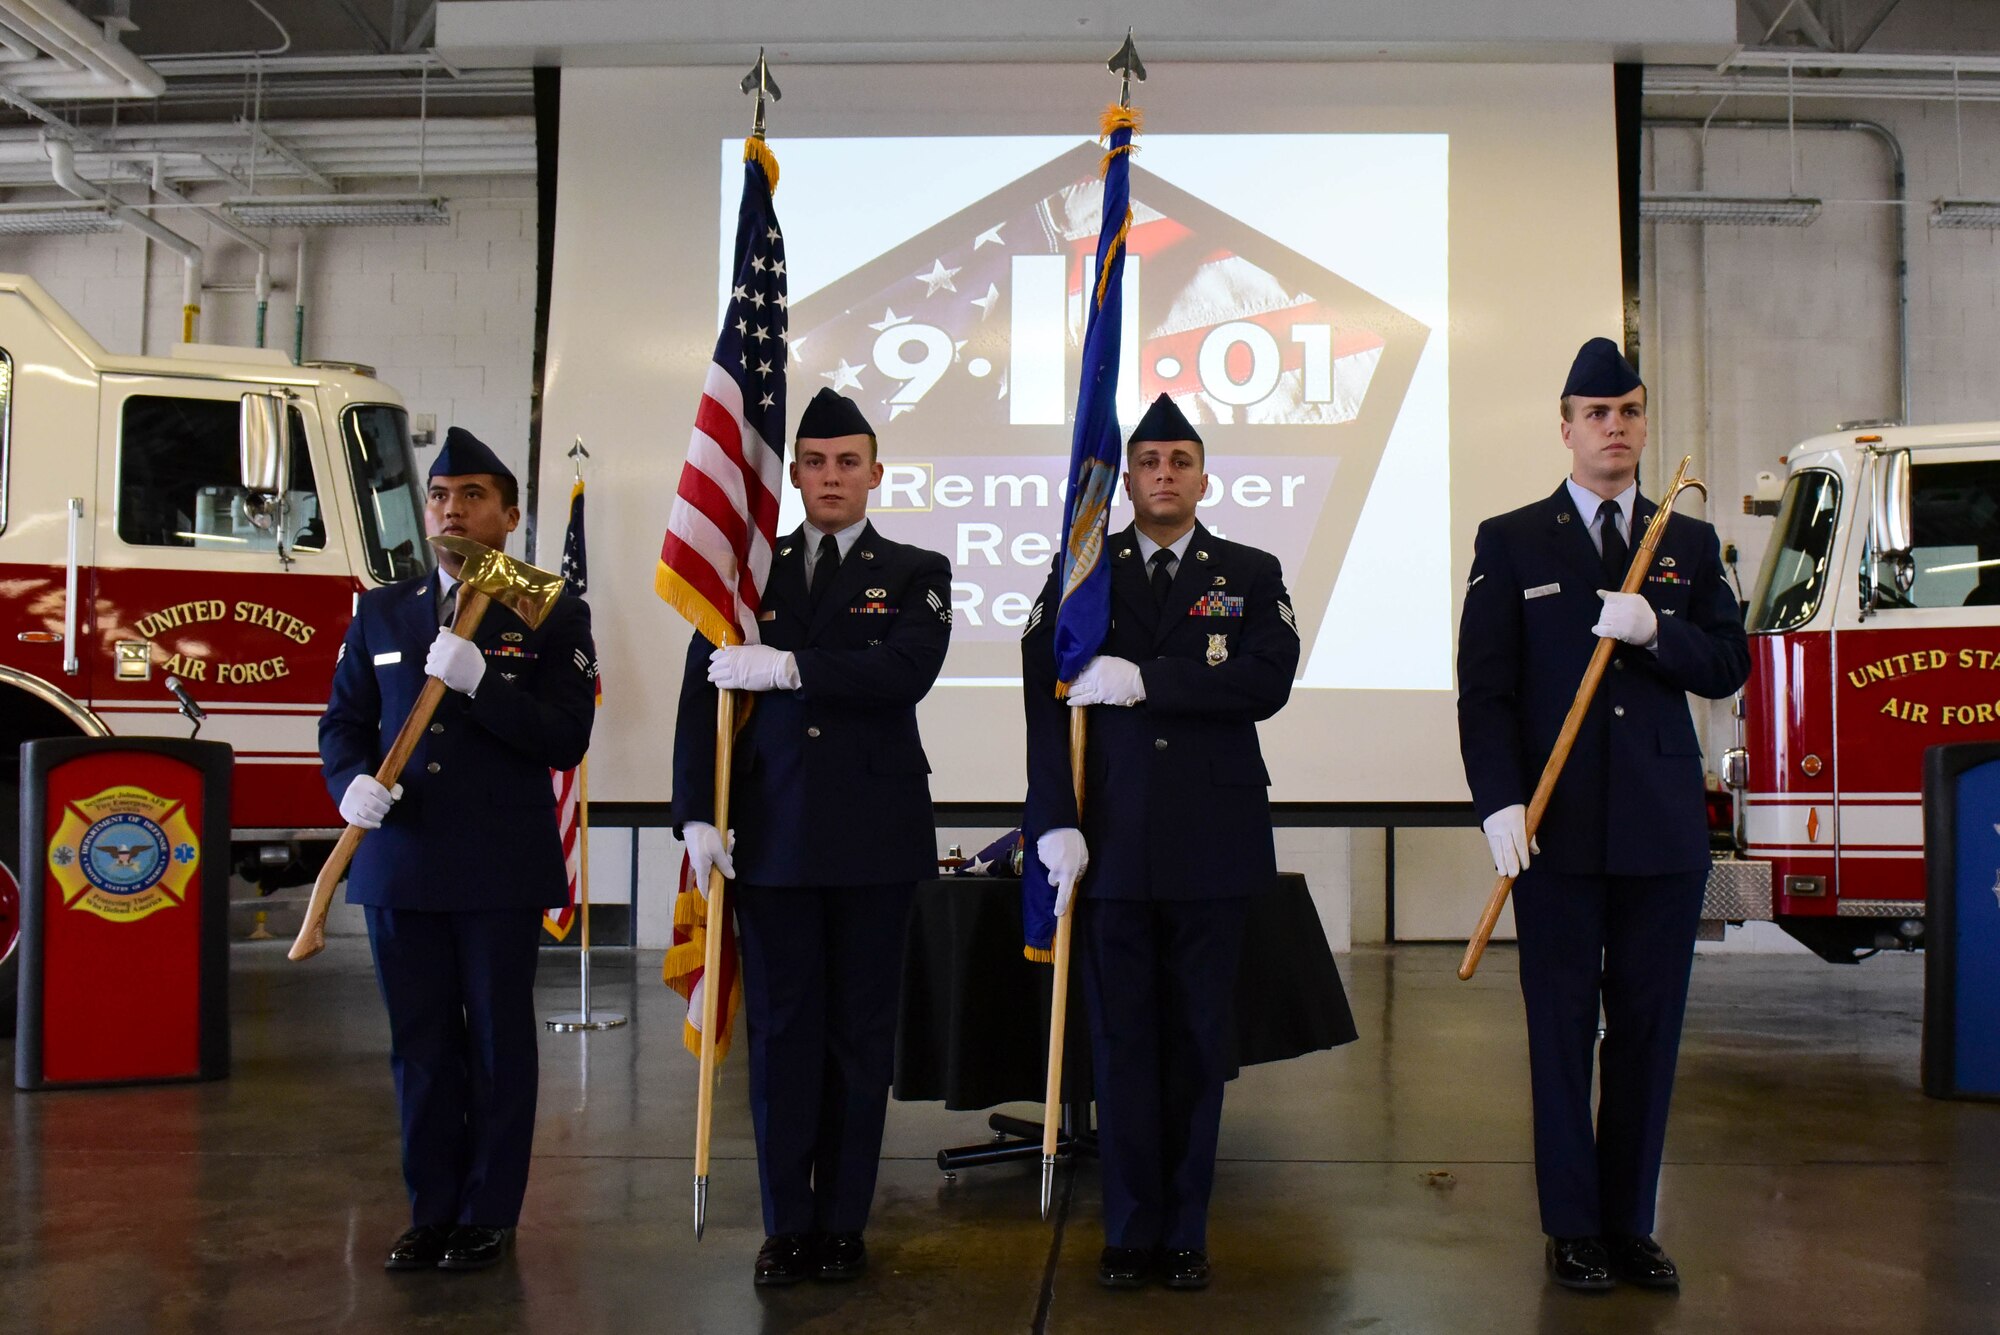 Members of the 4th Fighter Wing Fire Department present the colors during a 9/11 Remembrance Ceremony, Sept. 11, 2017, at Seymour Johnson Air Force Base, North Carolina. Seymour Johnson AFB and Americans across the United States took time to pay homage to those who lost their lives in the deliberate and vicious terrorist attacks. (U.S. Air Force photo by Airman 1st Class Victoria Boyton)